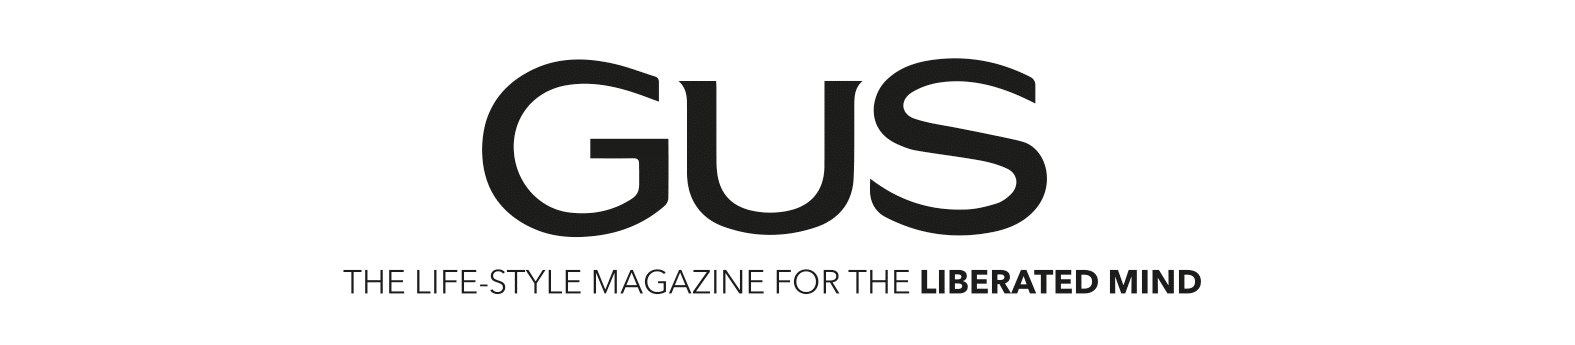 GUS - The Life-Style Magazine for the Liberated Mind